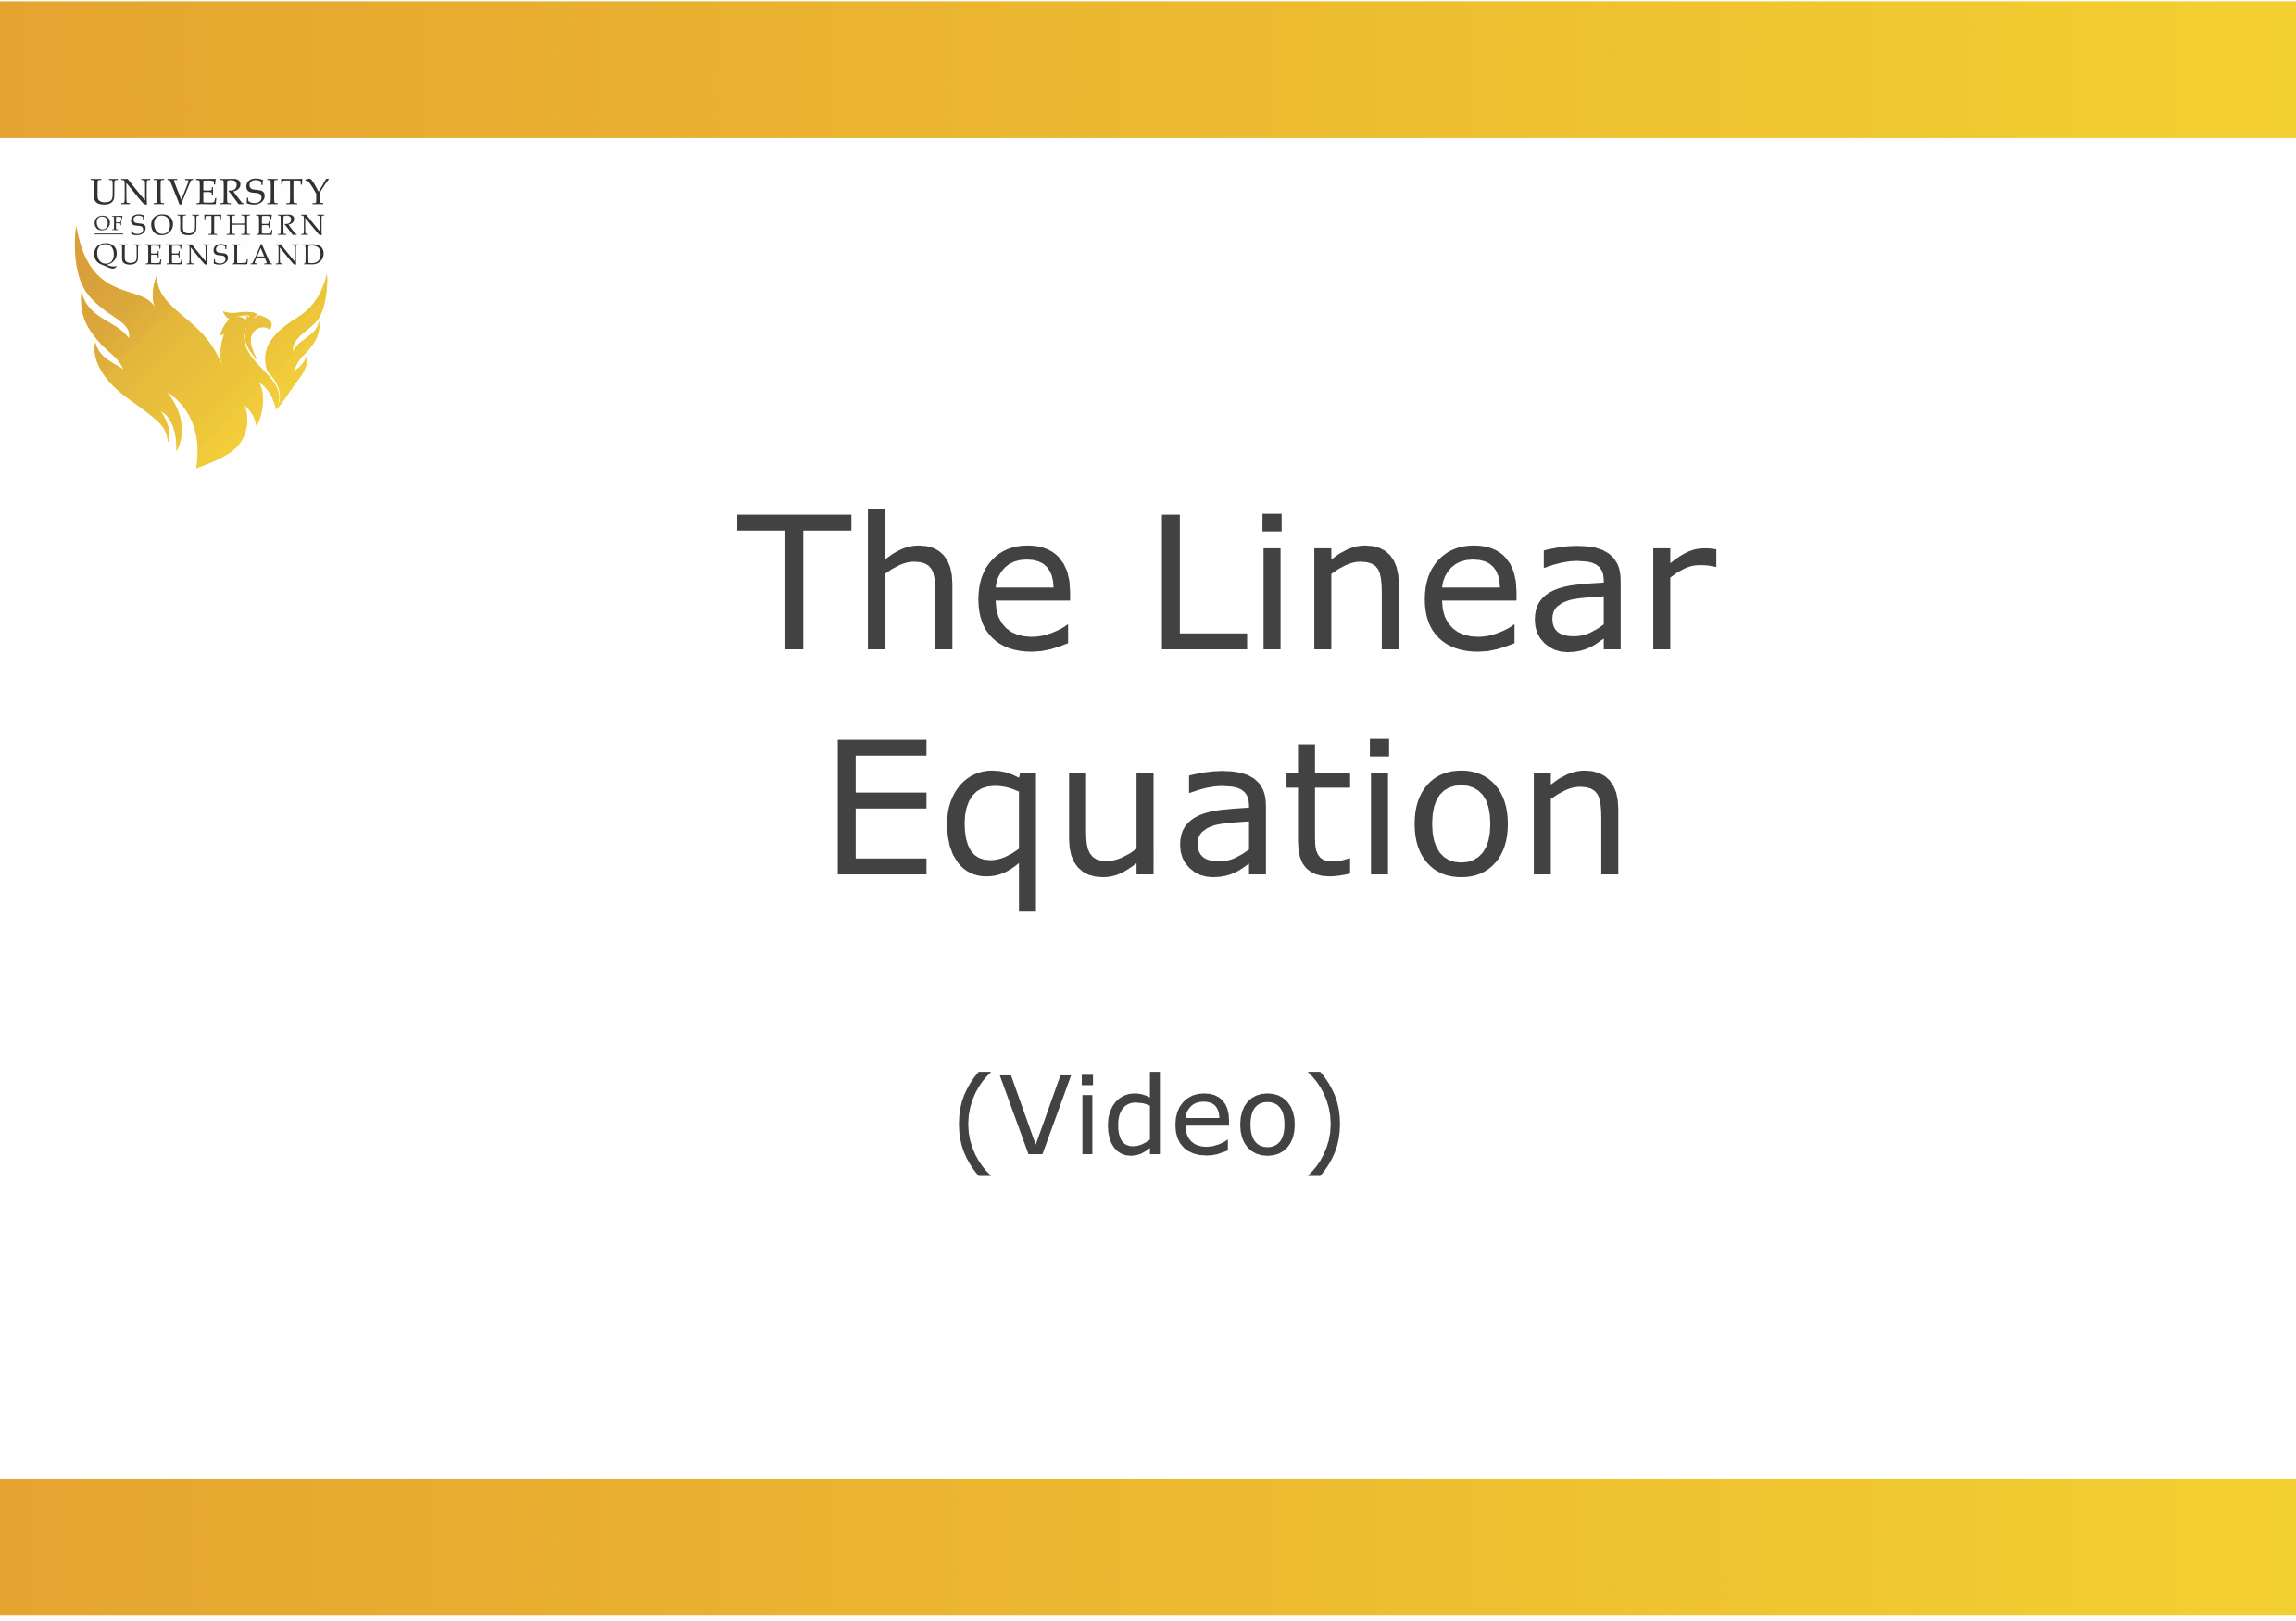 image to play the video: The linear equation